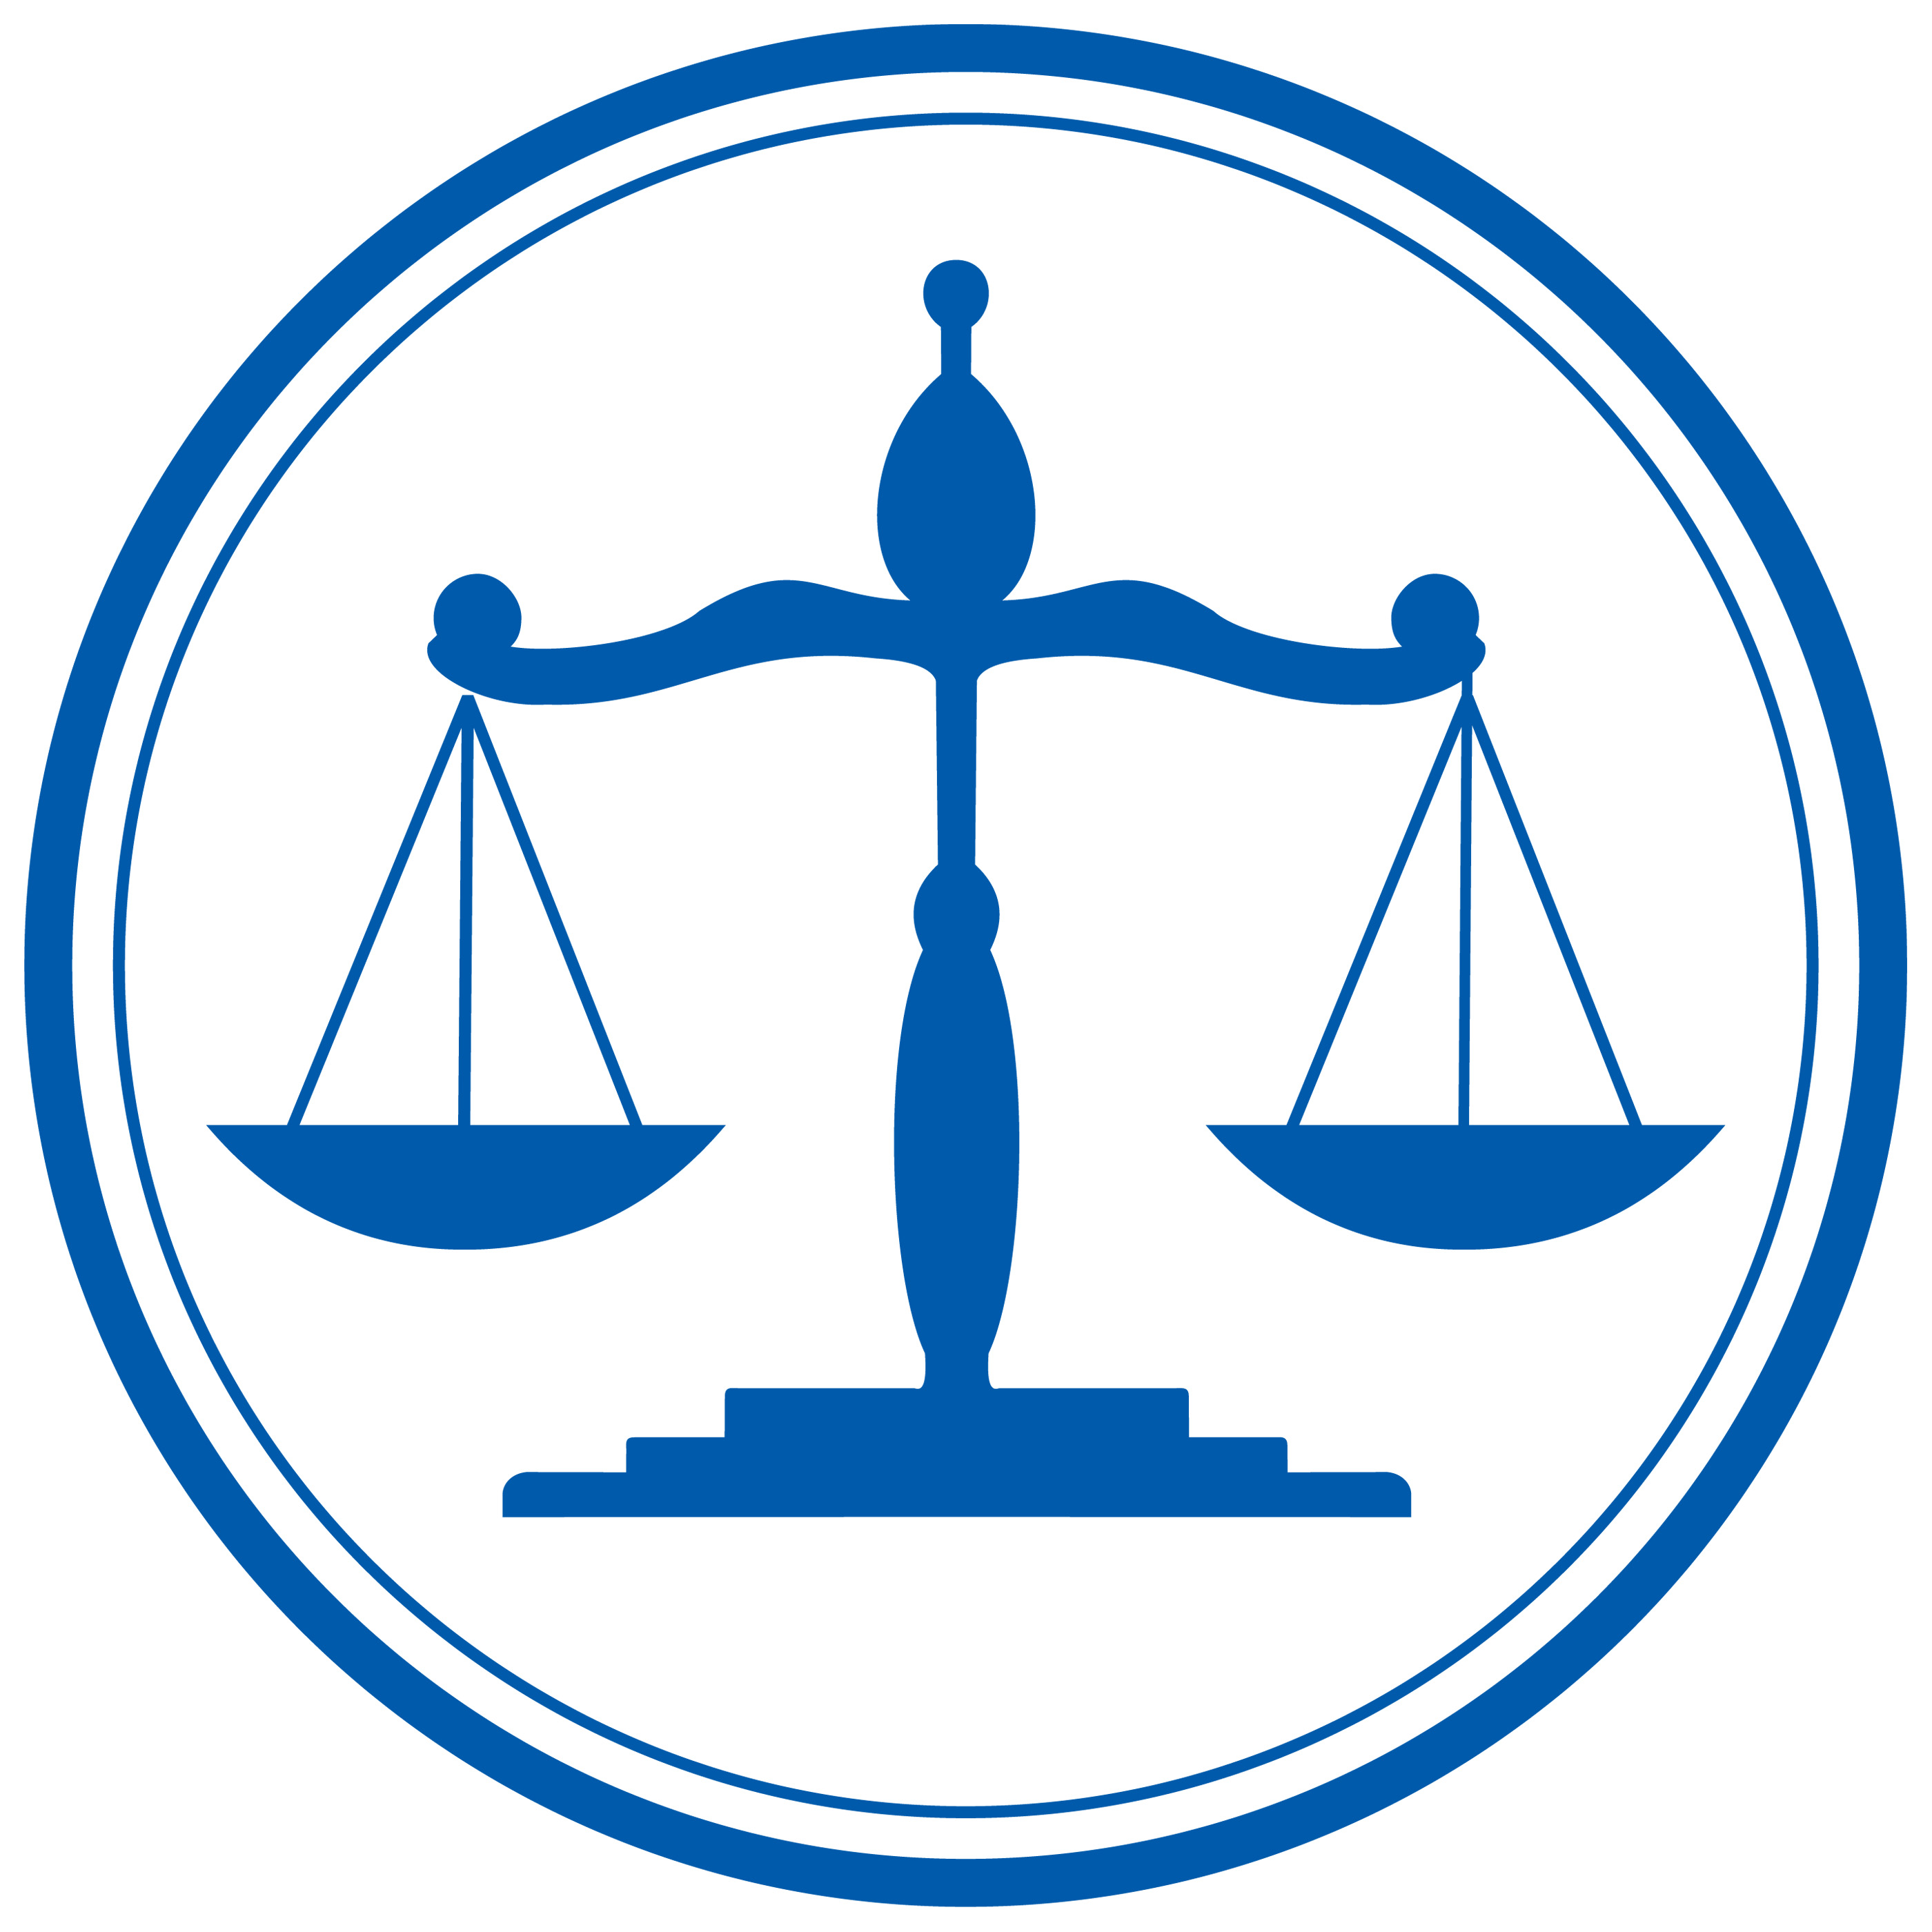 Legal scale of law clipart